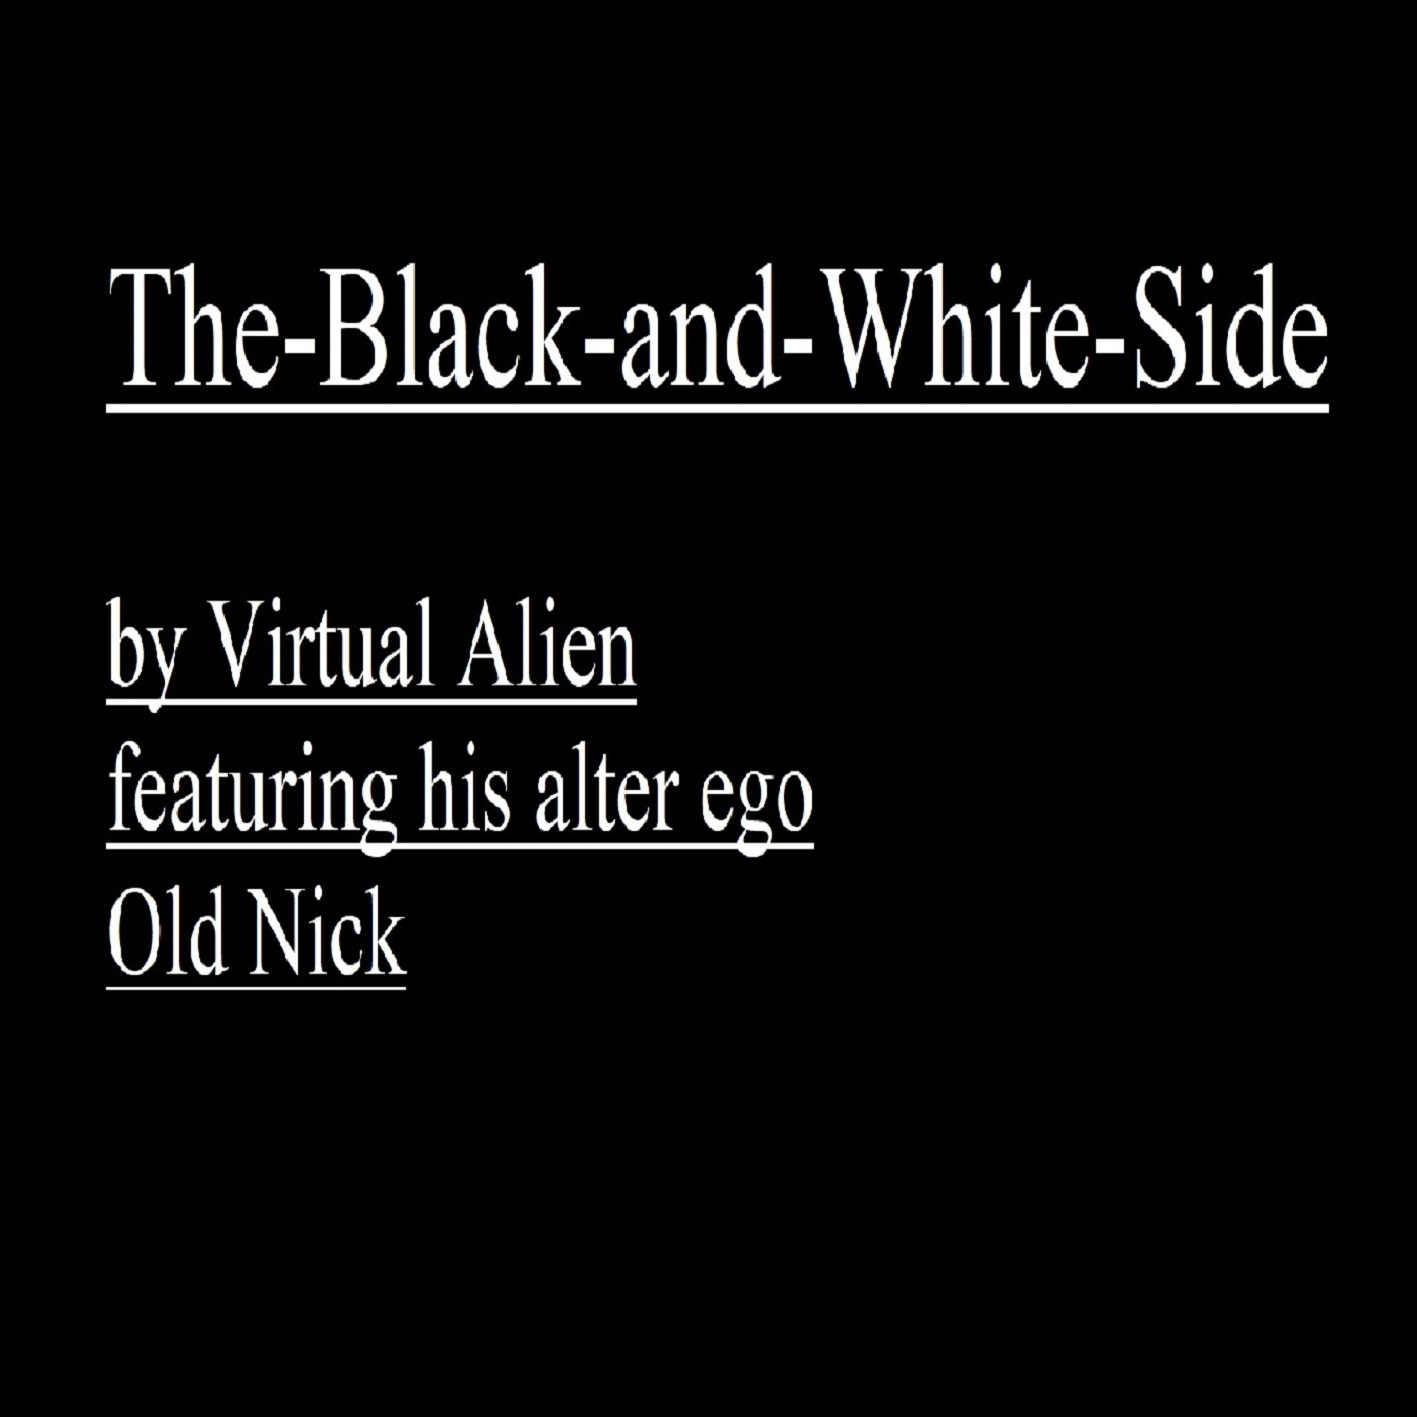 The Black and White Side album by Old Nick-1995